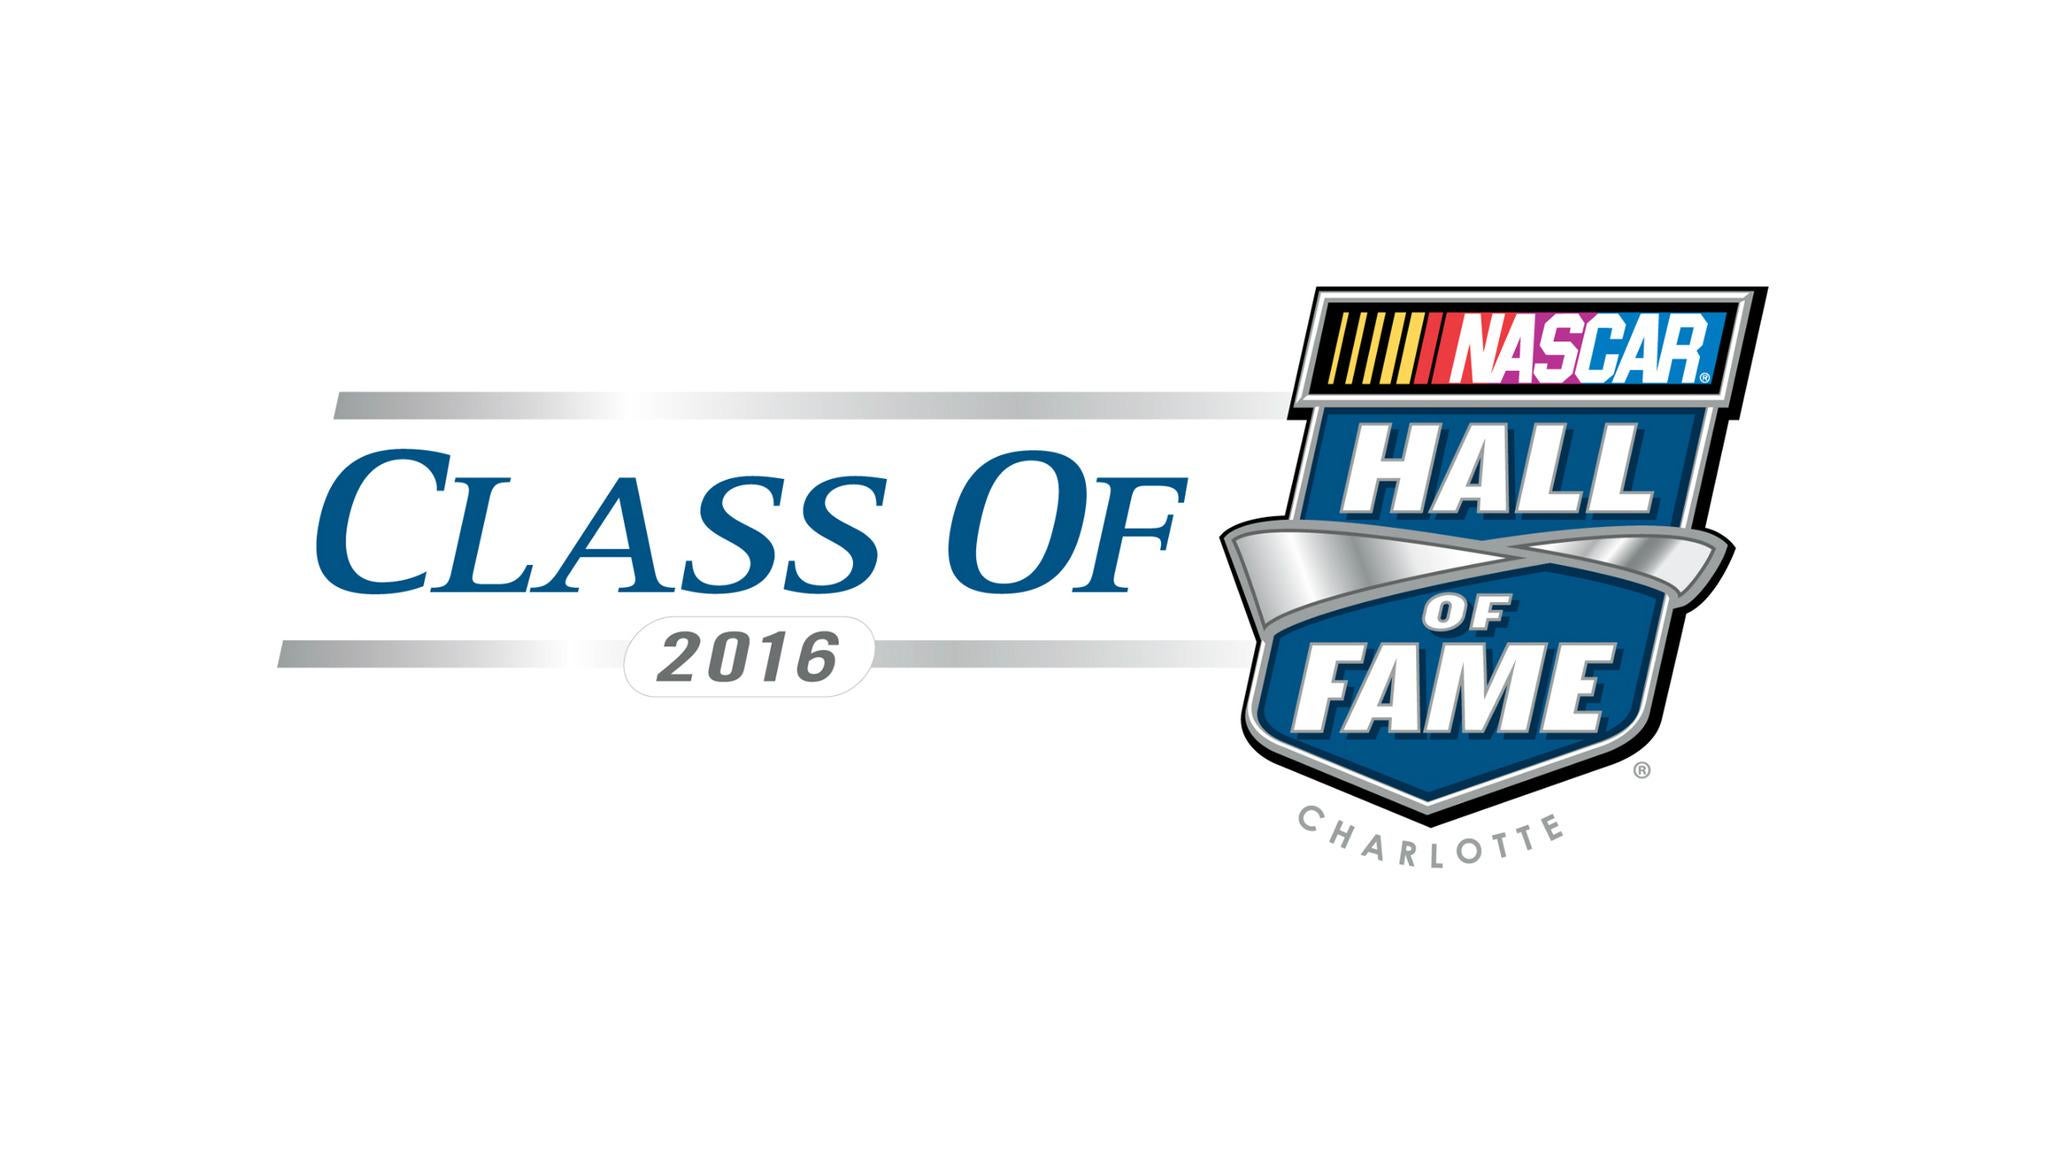 NASCAR Hall of Fame Induction Ceremony Tickets Event Dates & Schedule